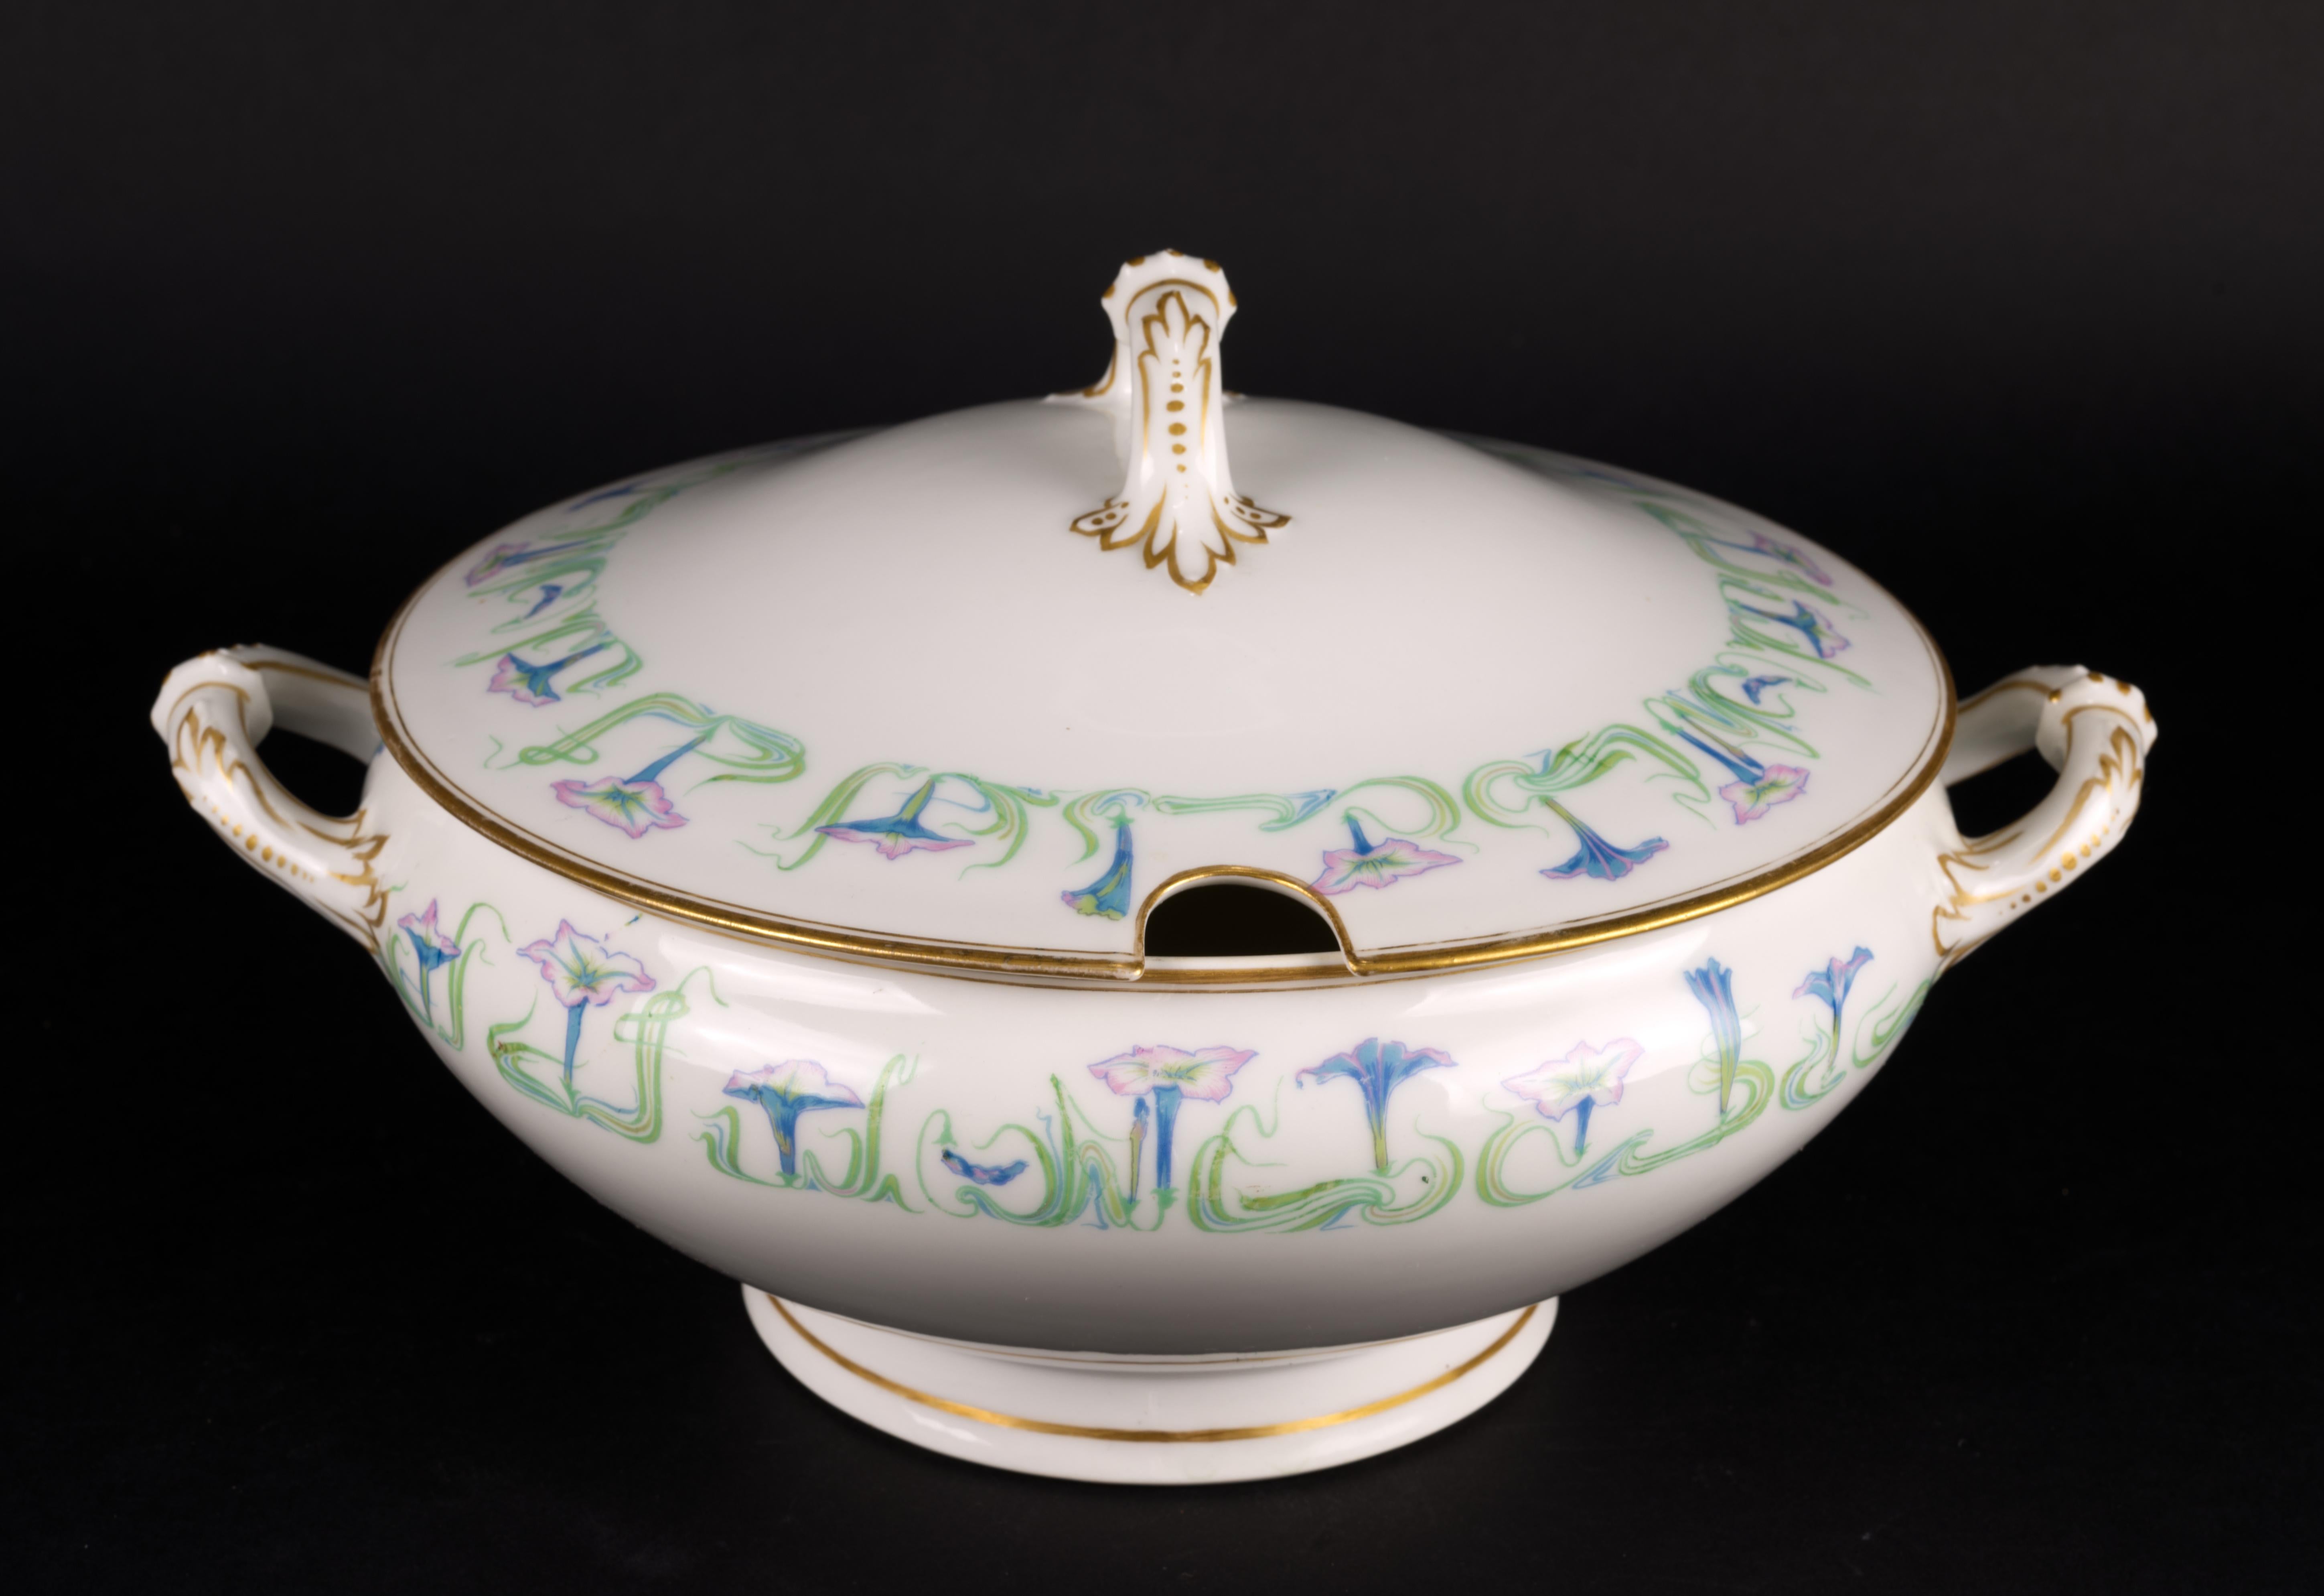  Rare and important lidded soup tureen by Haviland, Limoges is decorated with Art Deco flower pattern known as Schleiger 491; it is sometimes called 